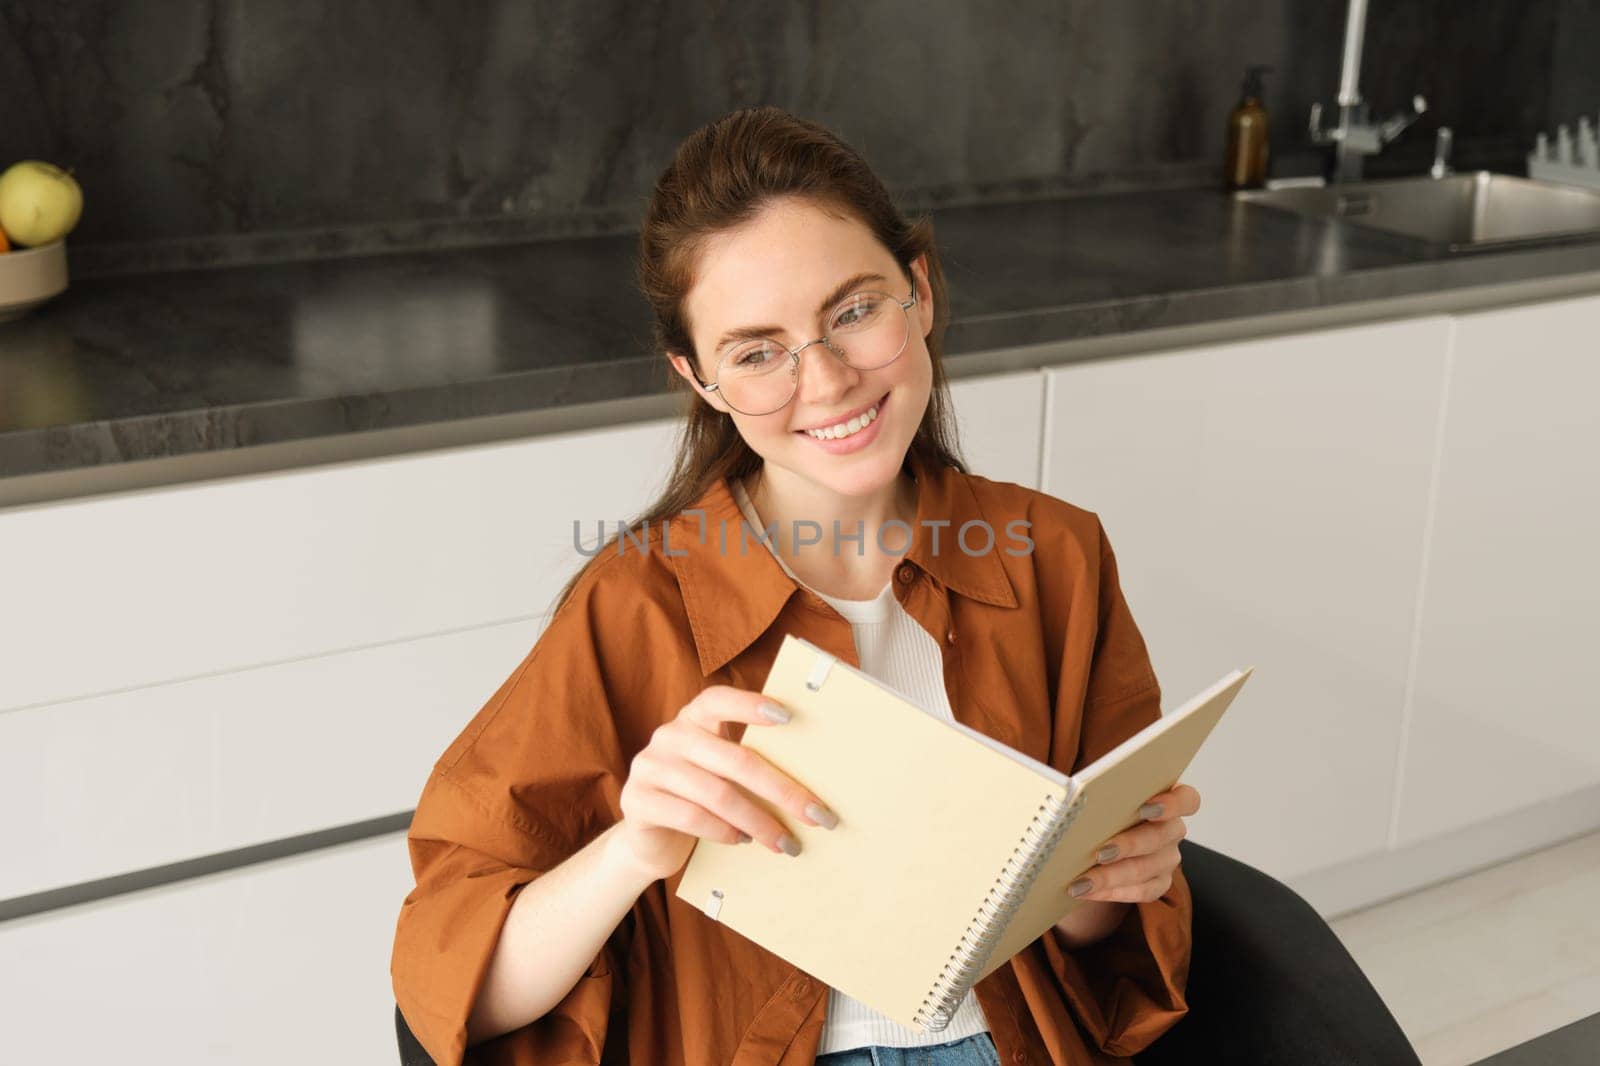 Close up portrait of young woman, student in kitchen, holding notebook, revising for exam at home, studying, reading her planner.